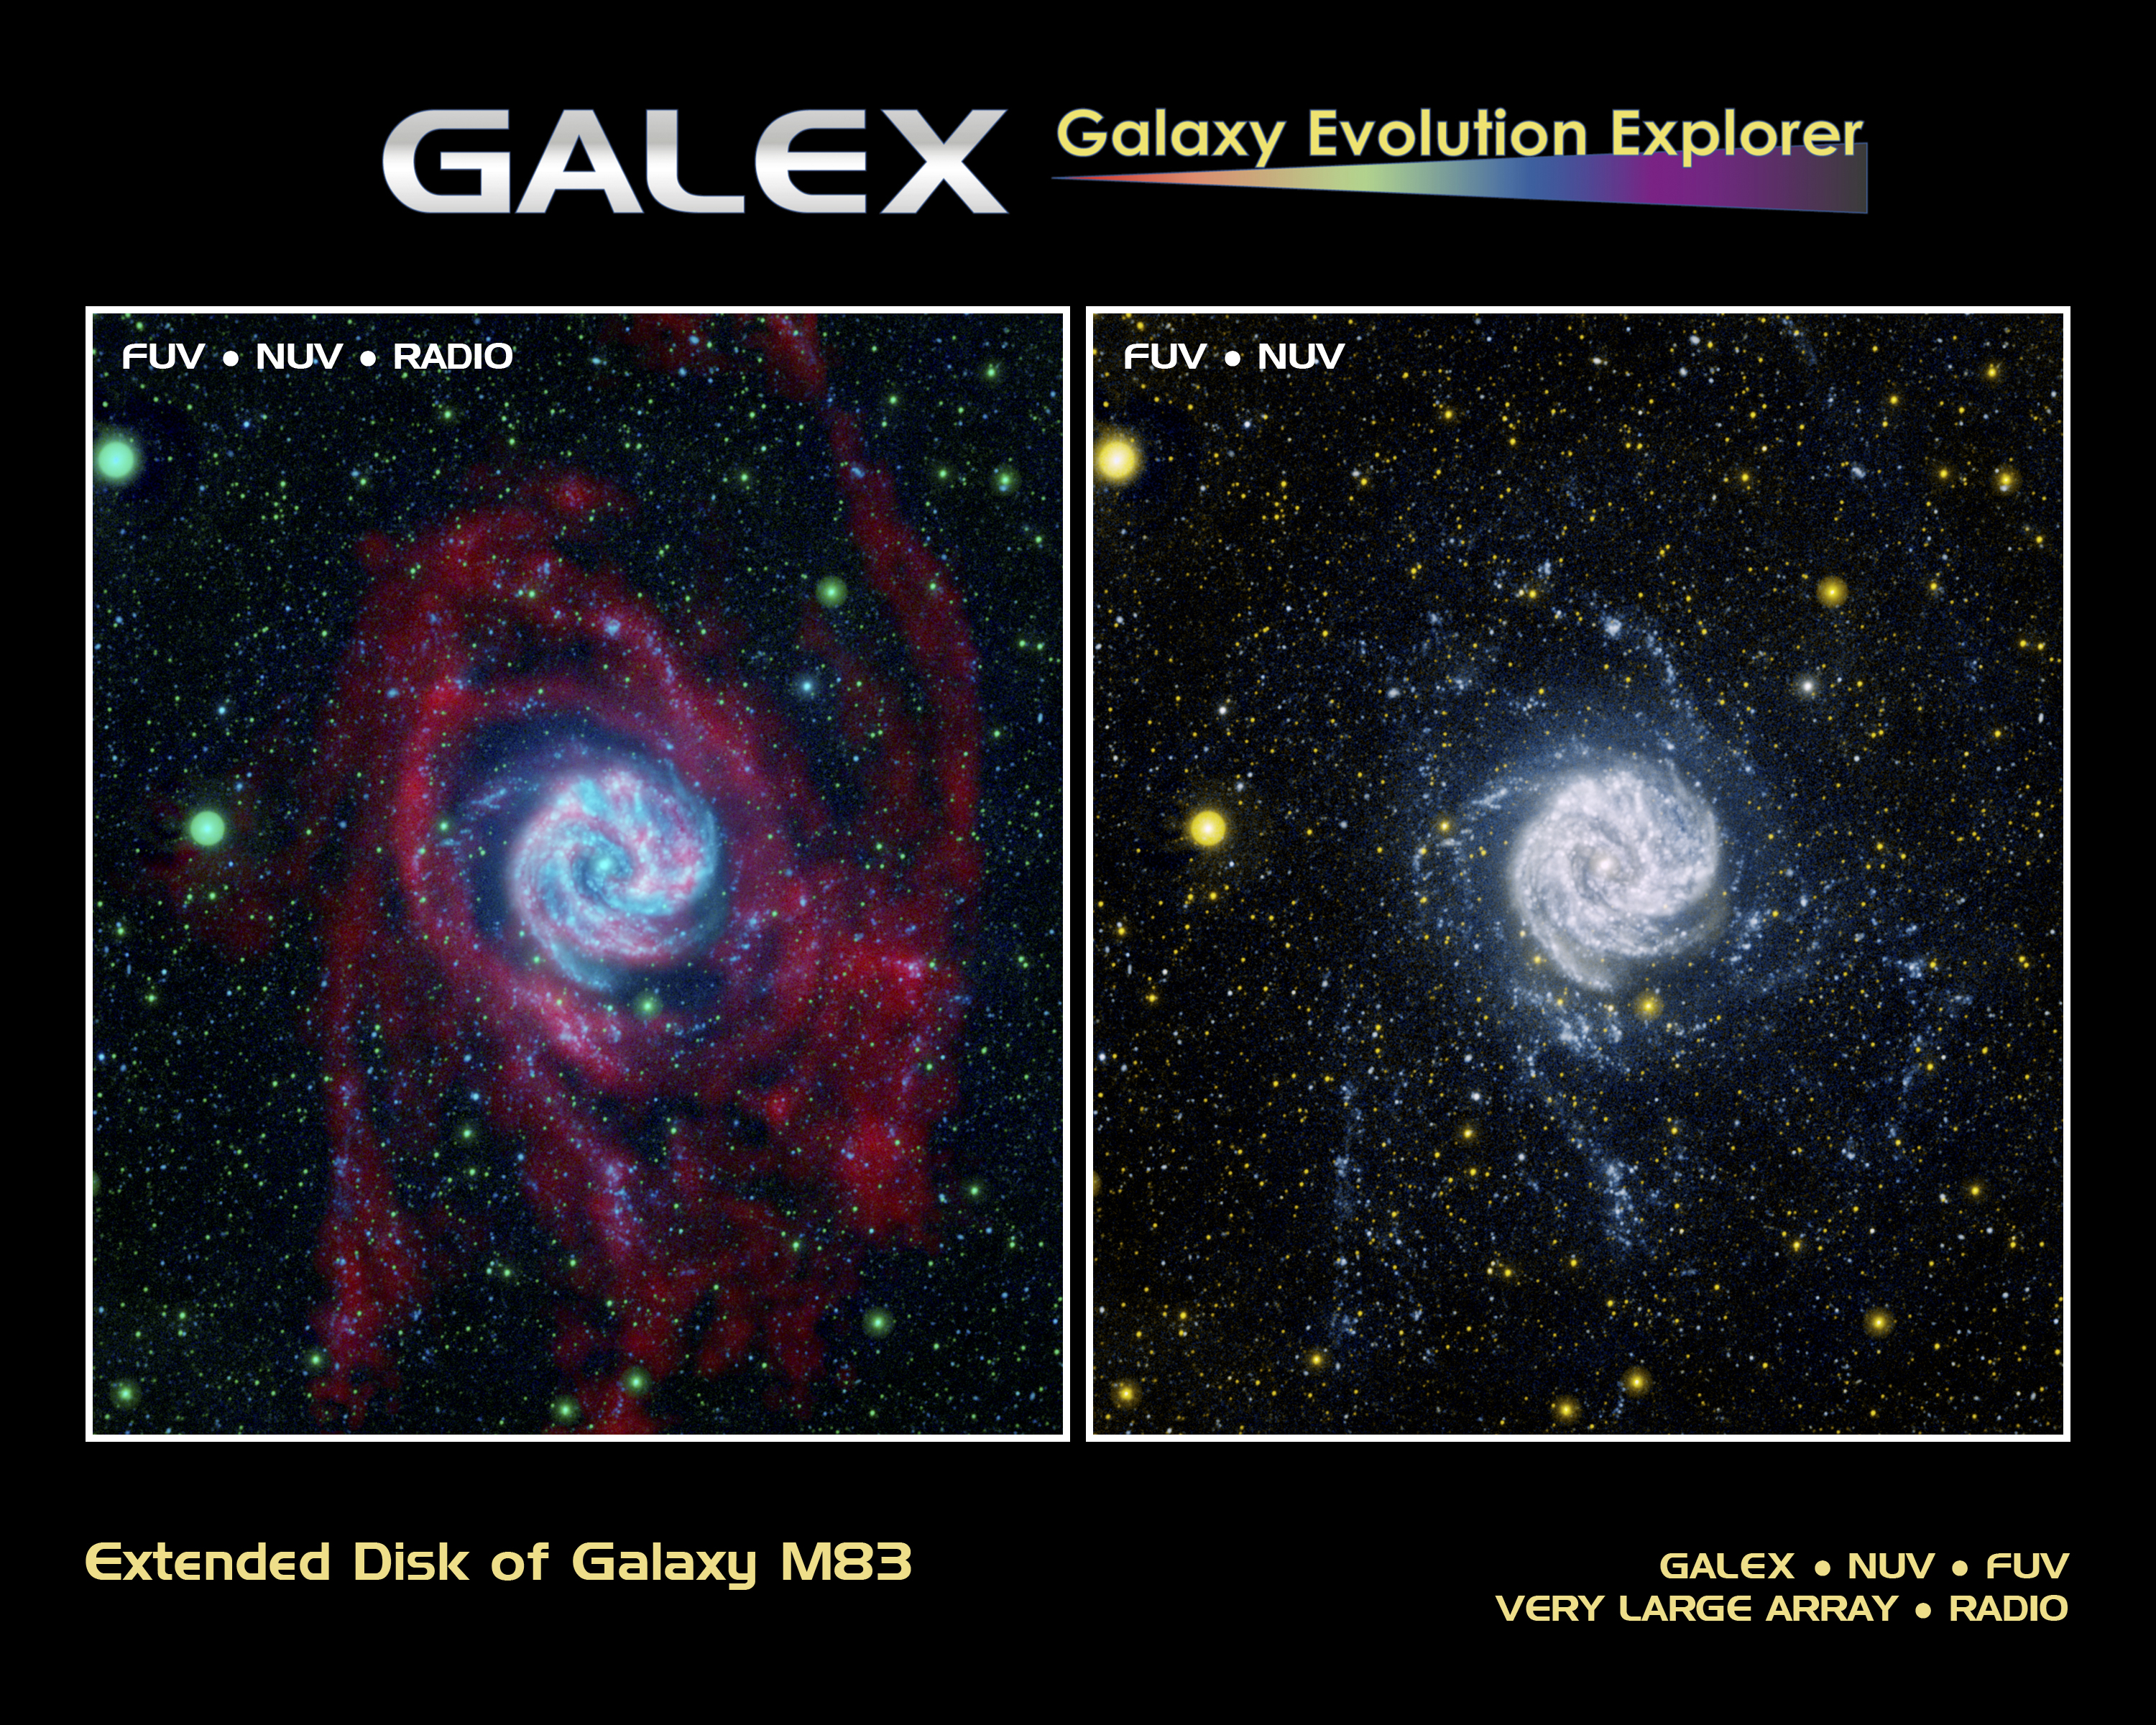 Extended Disk of Galaxy M83